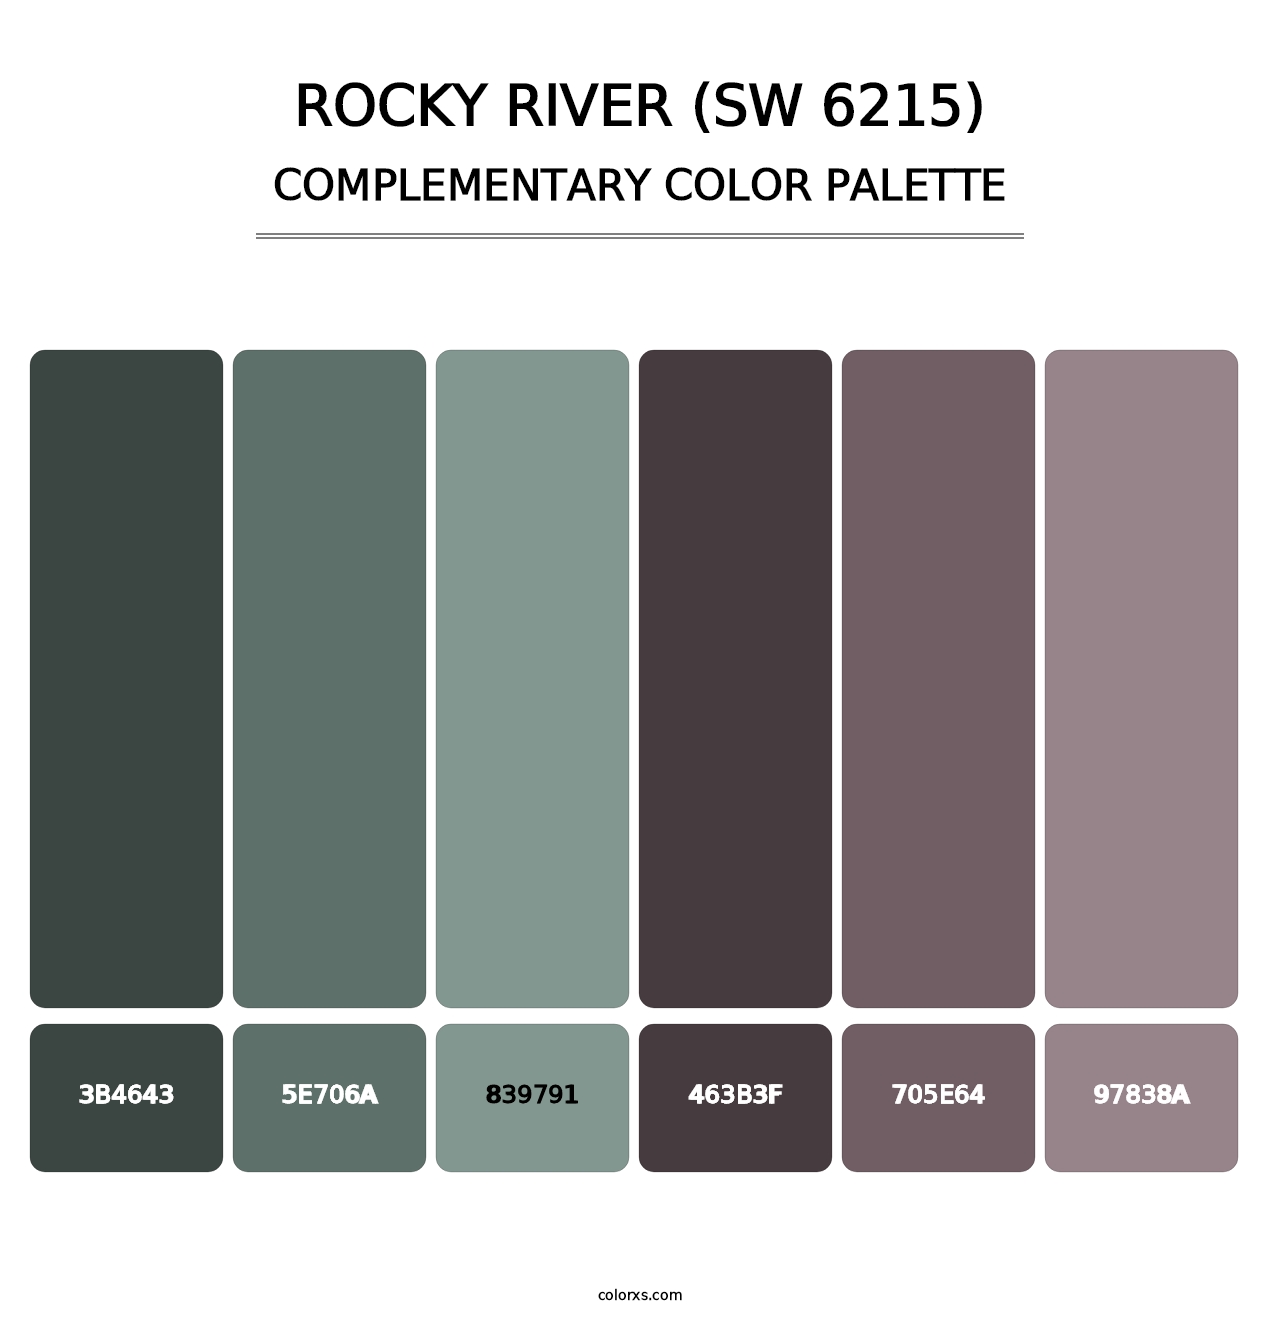 Rocky River (SW 6215) - Complementary Color Palette